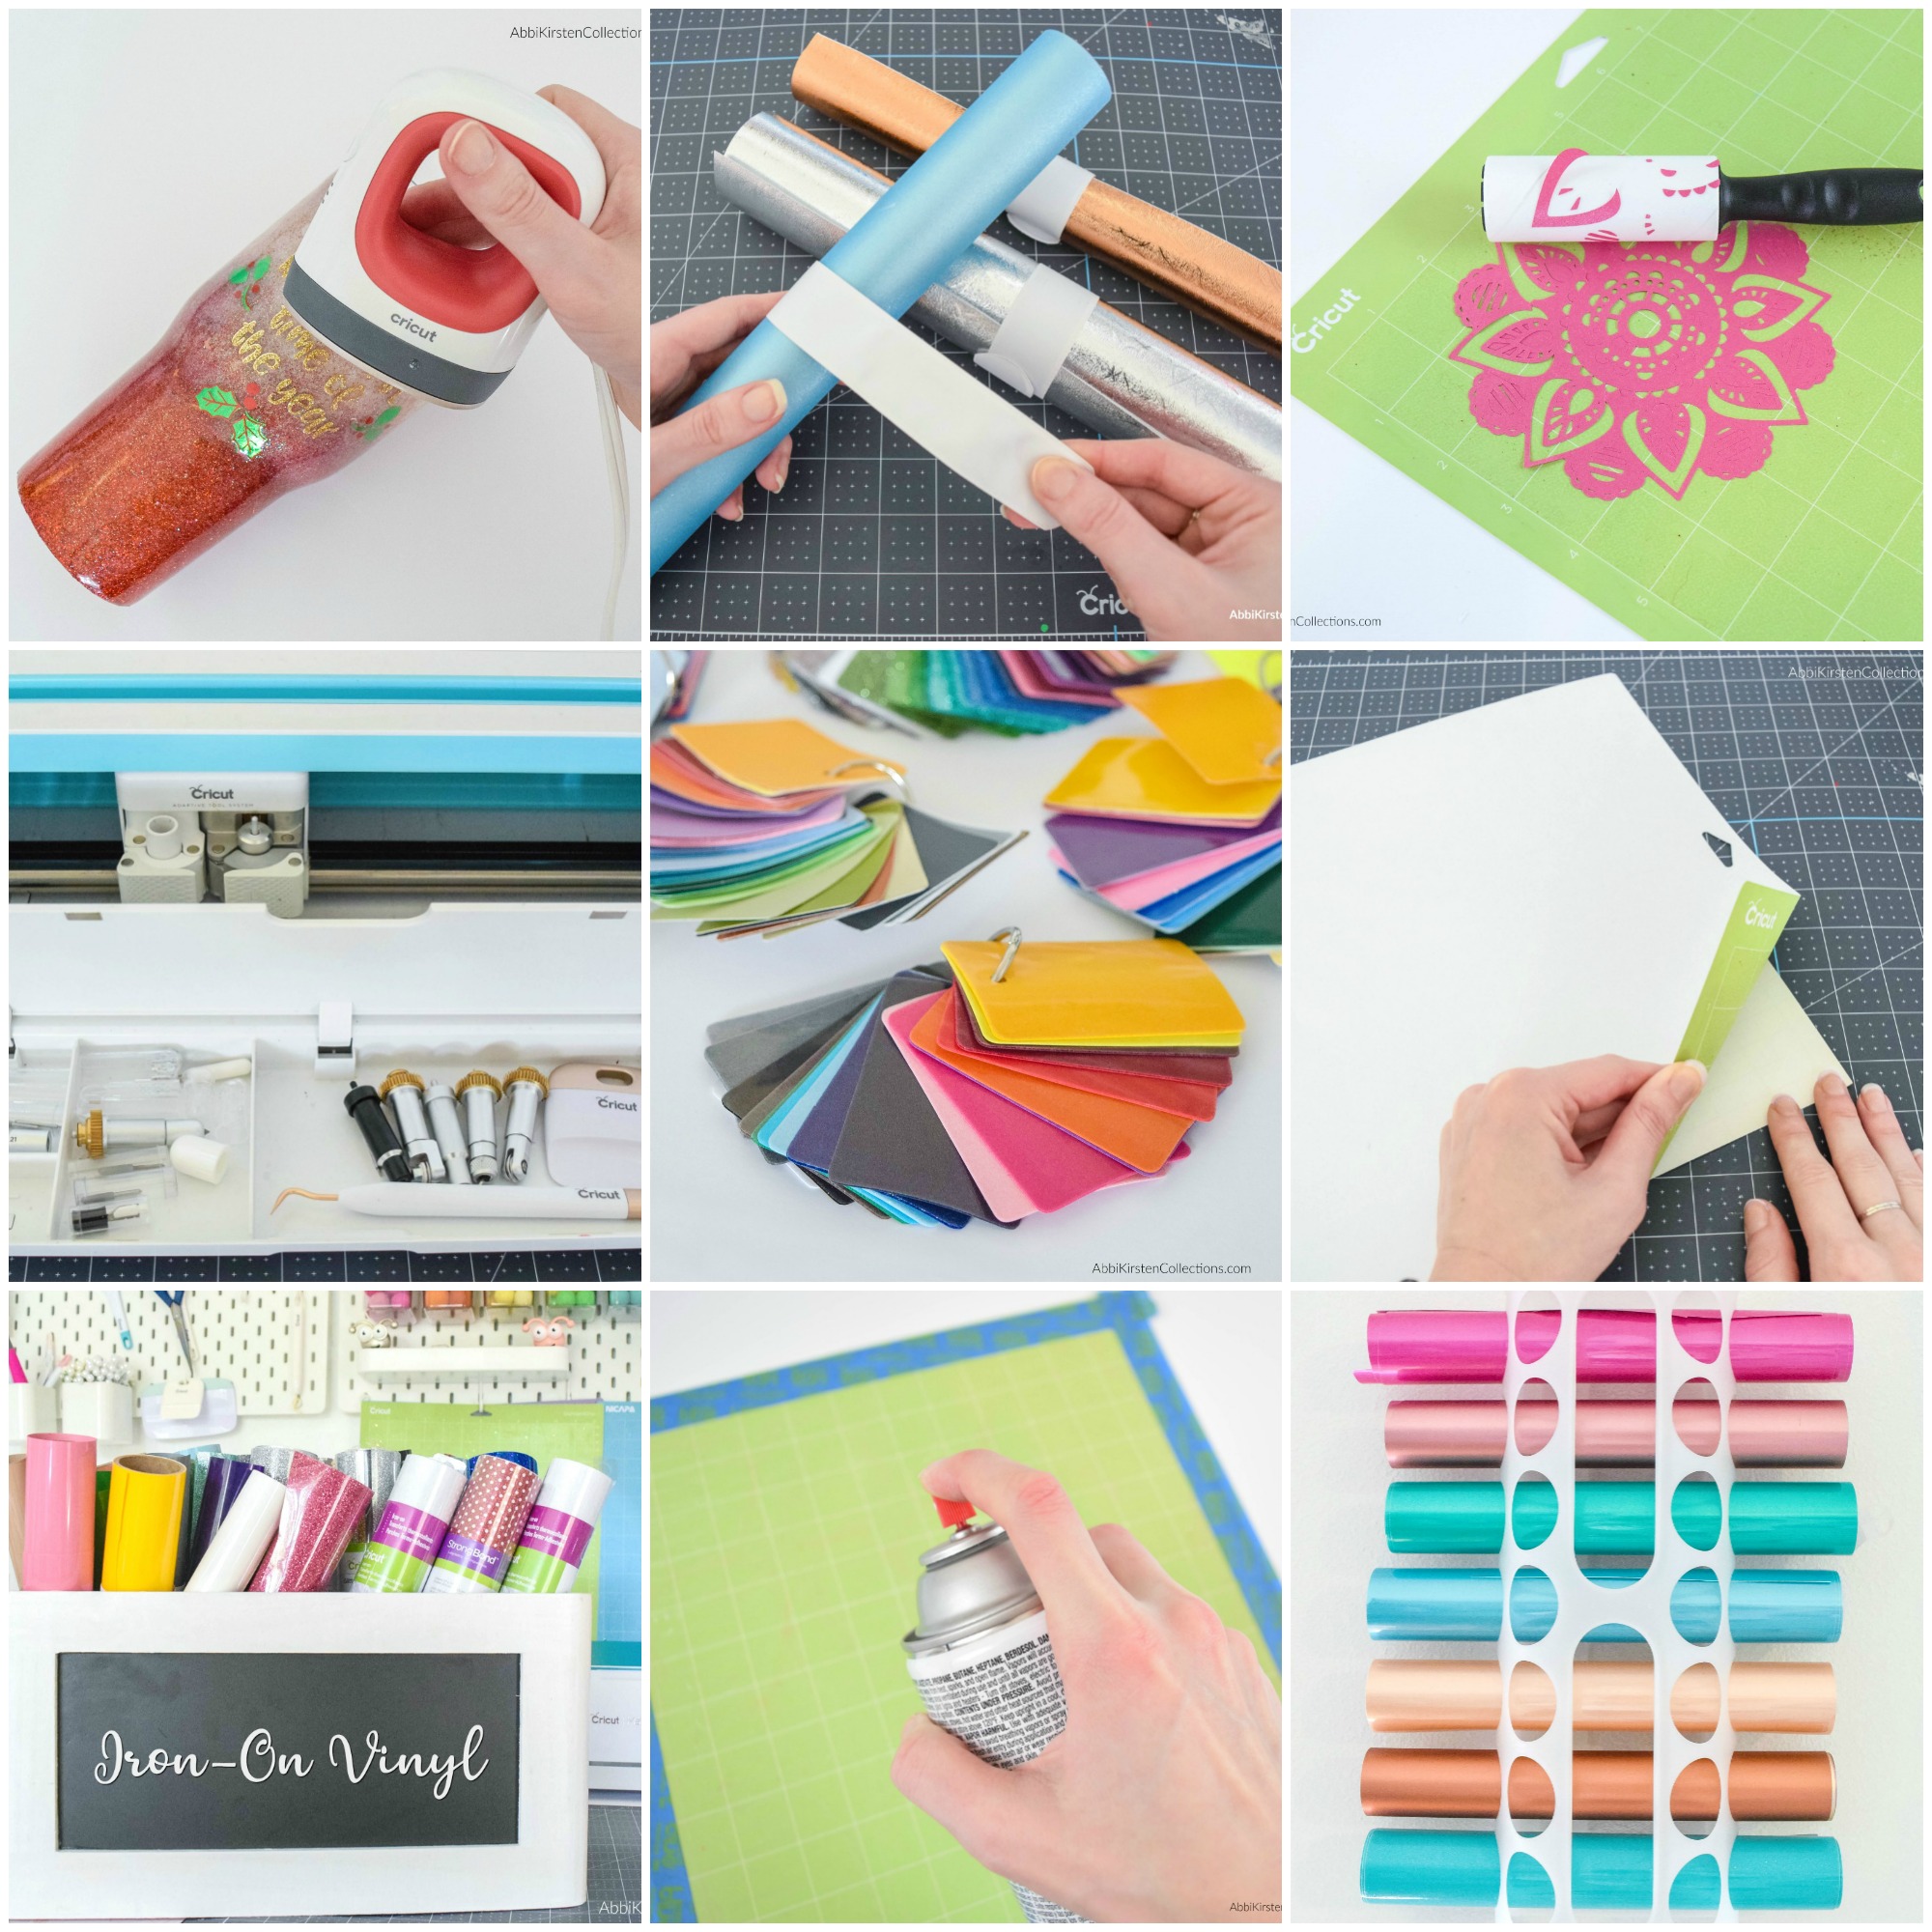 28 Cricut/Design Space Hacks That Beginners Should Know